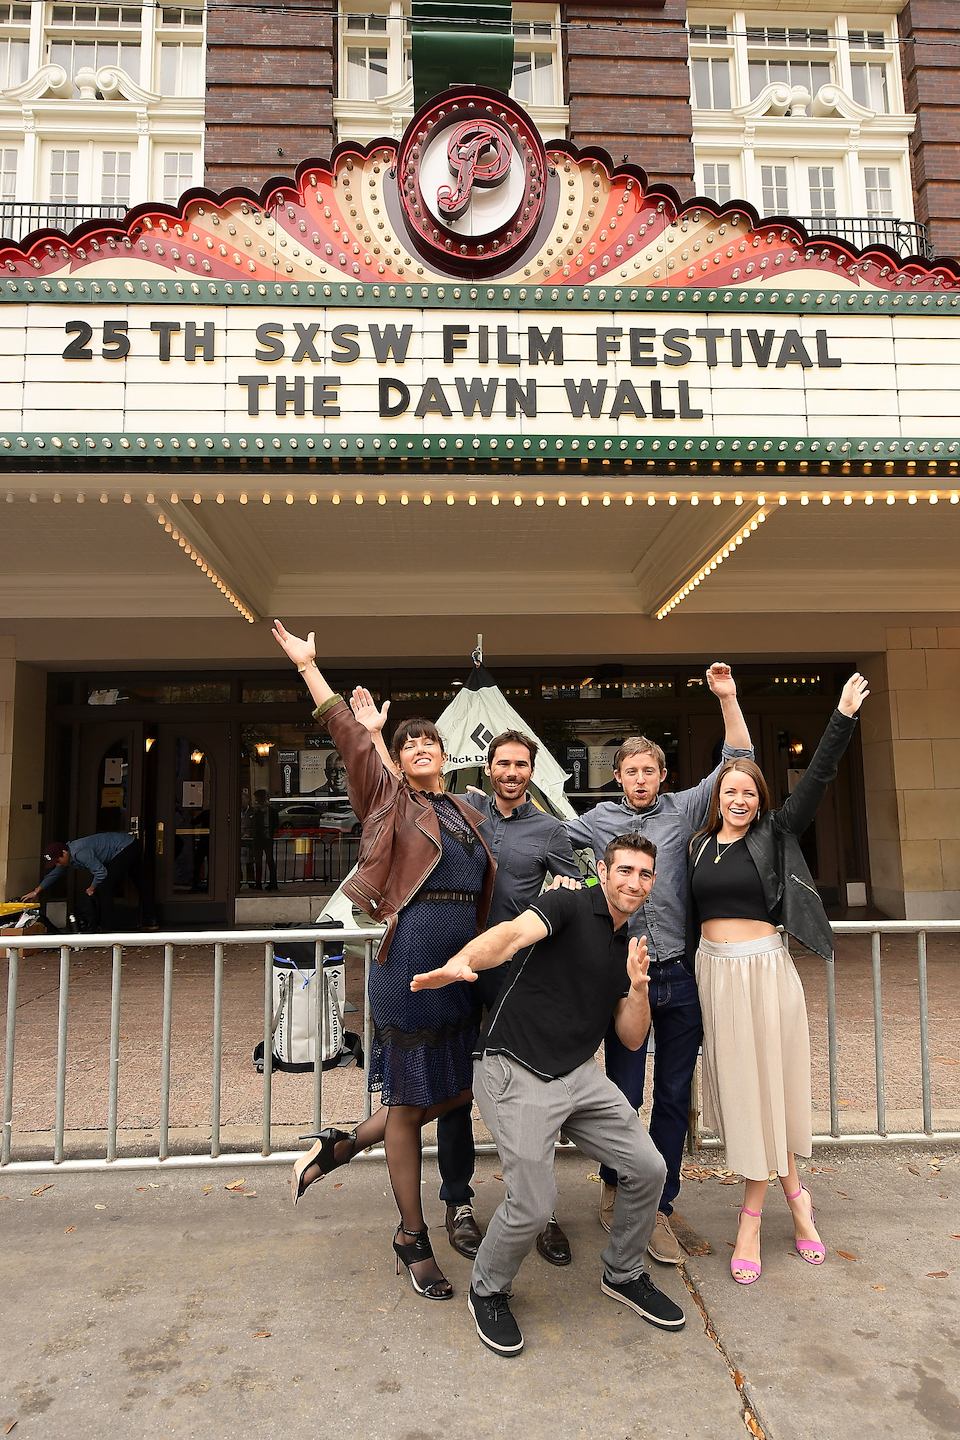 Jacqui Jorgeson, Kevin Jorgeson, Rebecca Caldwell, Tommy Caldwell, and Brett Lowell before the North American premiere of The Dawn Wall. Photo by Matt Winkelmeyer/Getty Images for SXSW